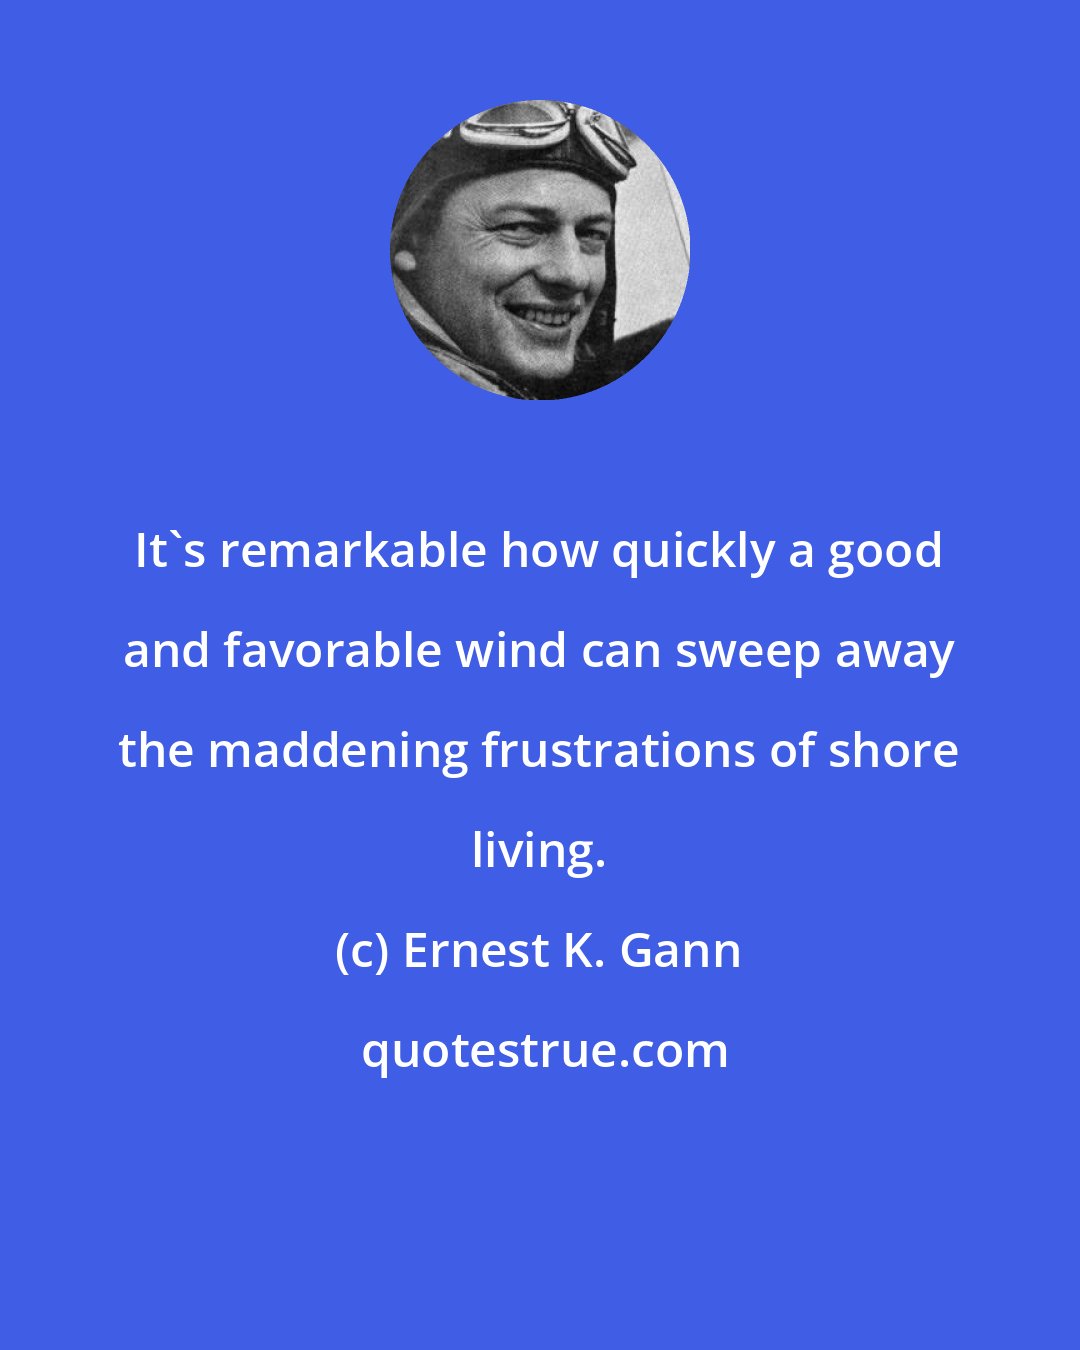 Ernest K. Gann: It's remarkable how quickly a good and favorable wind can sweep away the maddening frustrations of shore living.